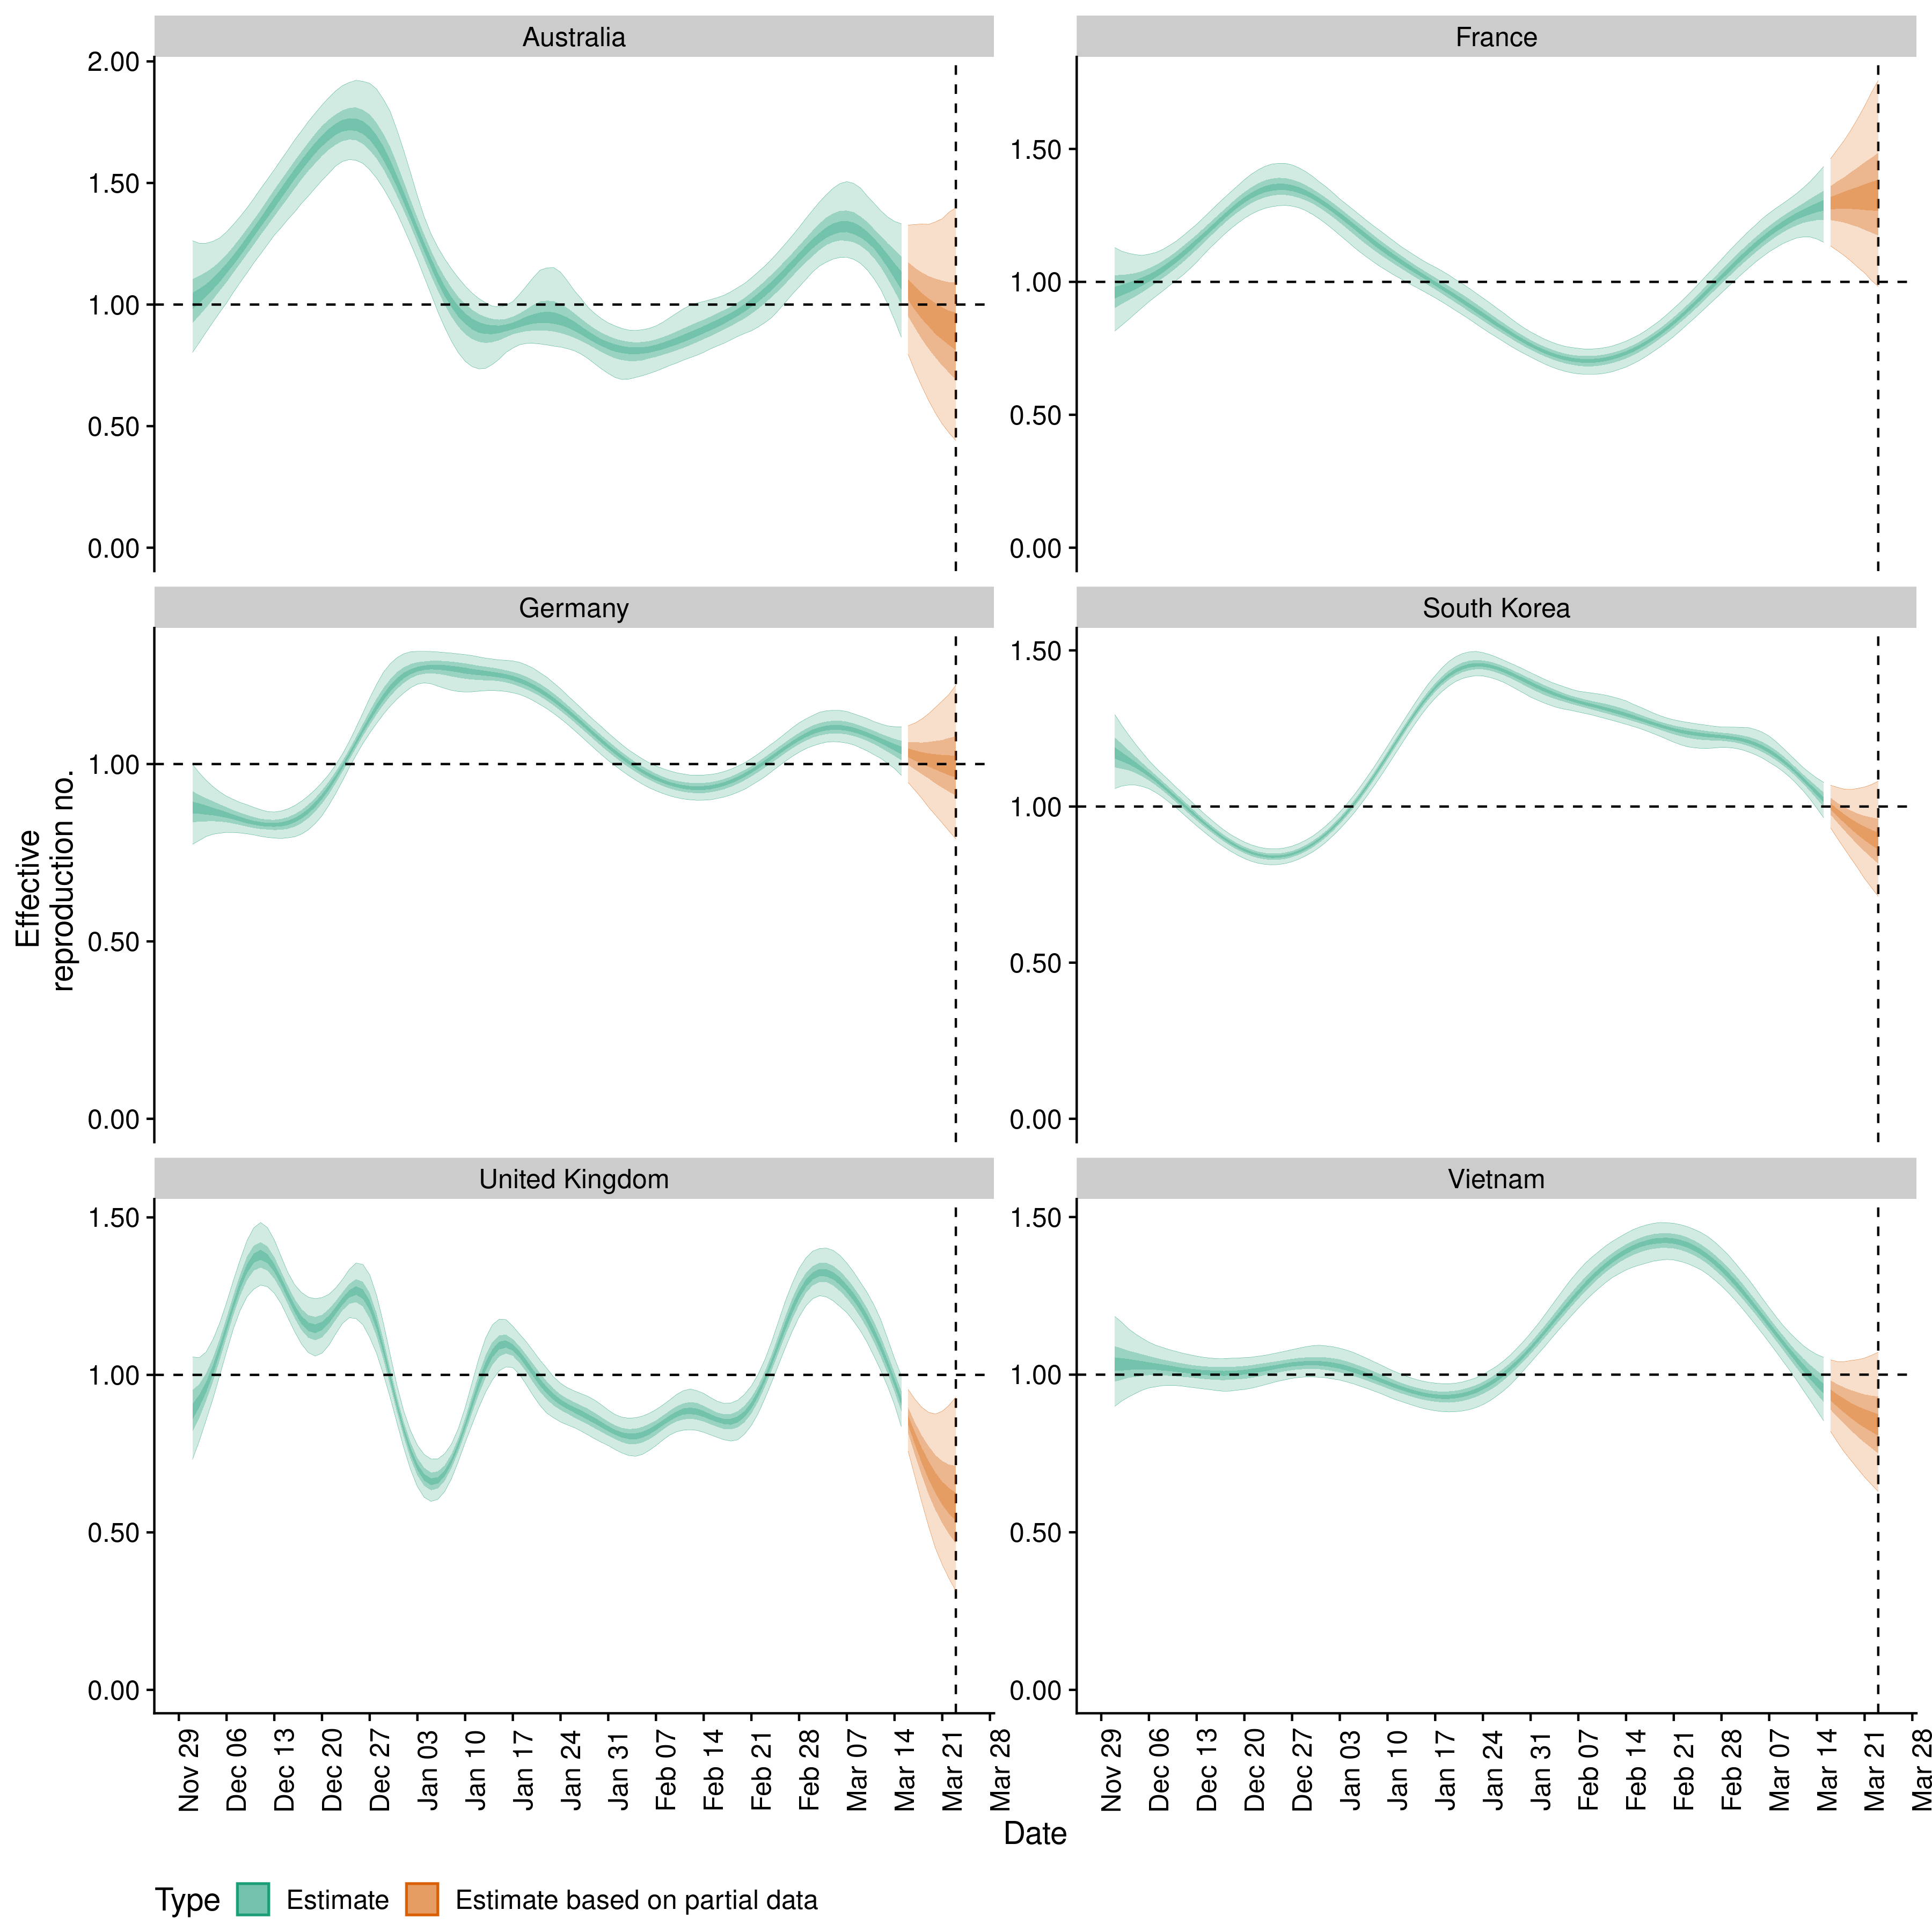 An example figure showing effective reproduction number estimates over time from a subset of countries.